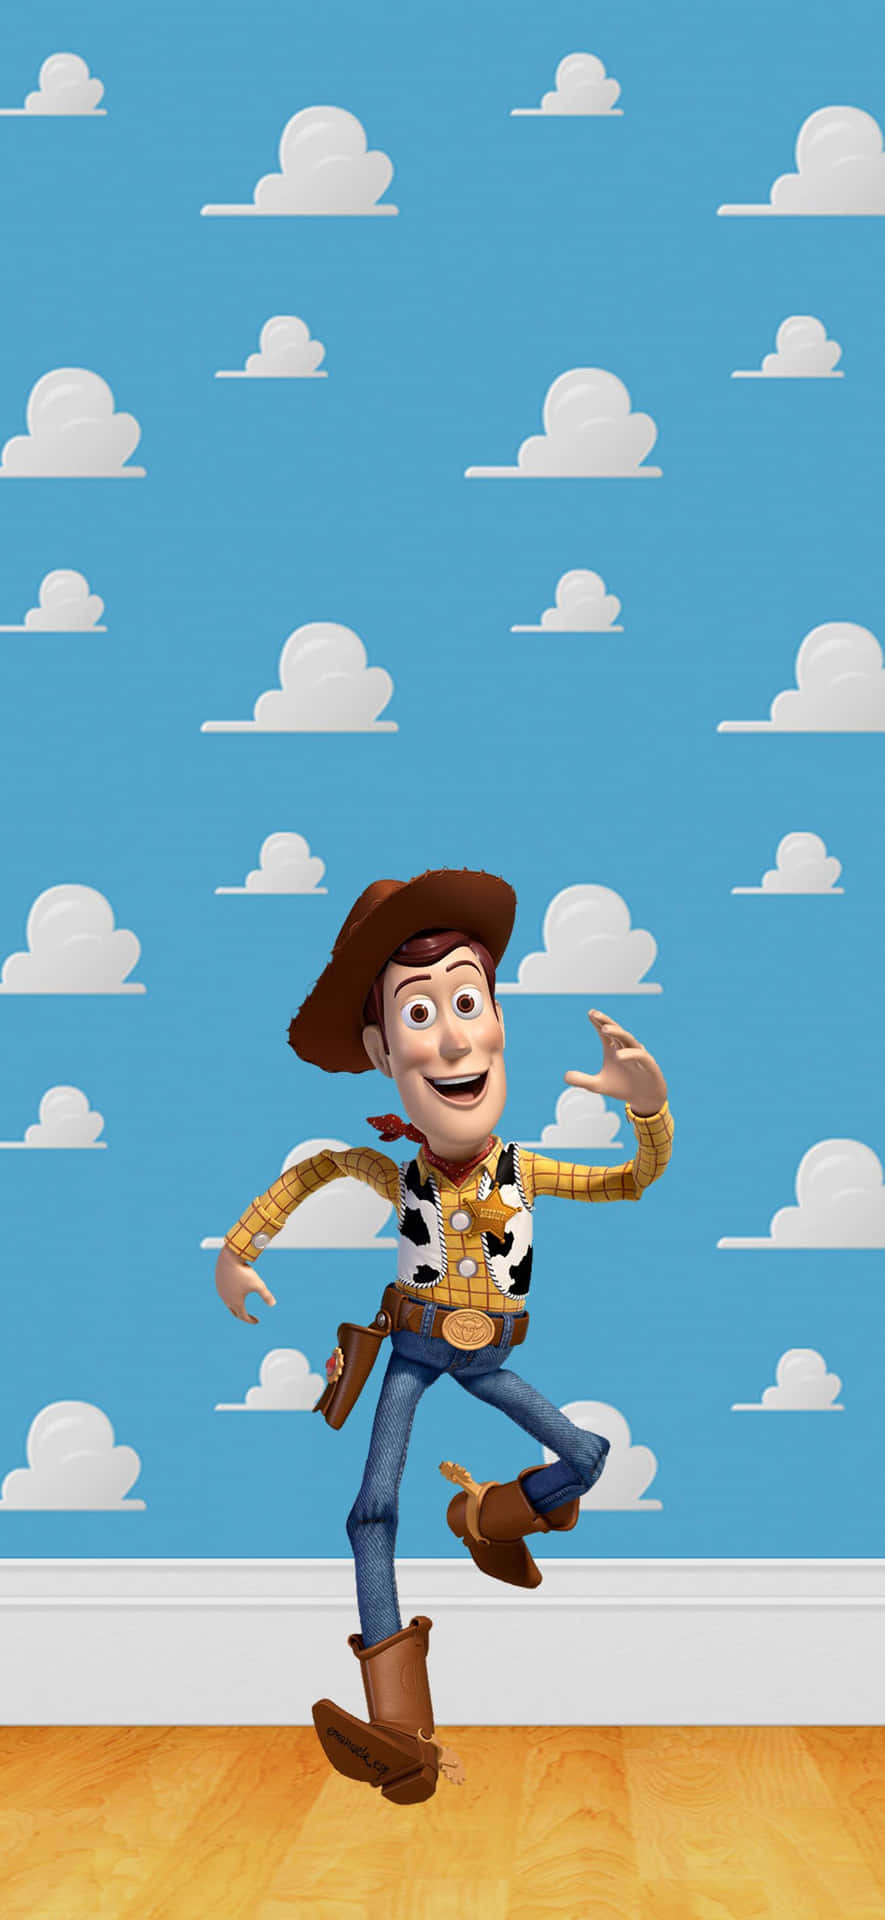 Toy Story 4 1080P, 2K, 4K, 5K HD wallpapers free download | Wallpaper Flare